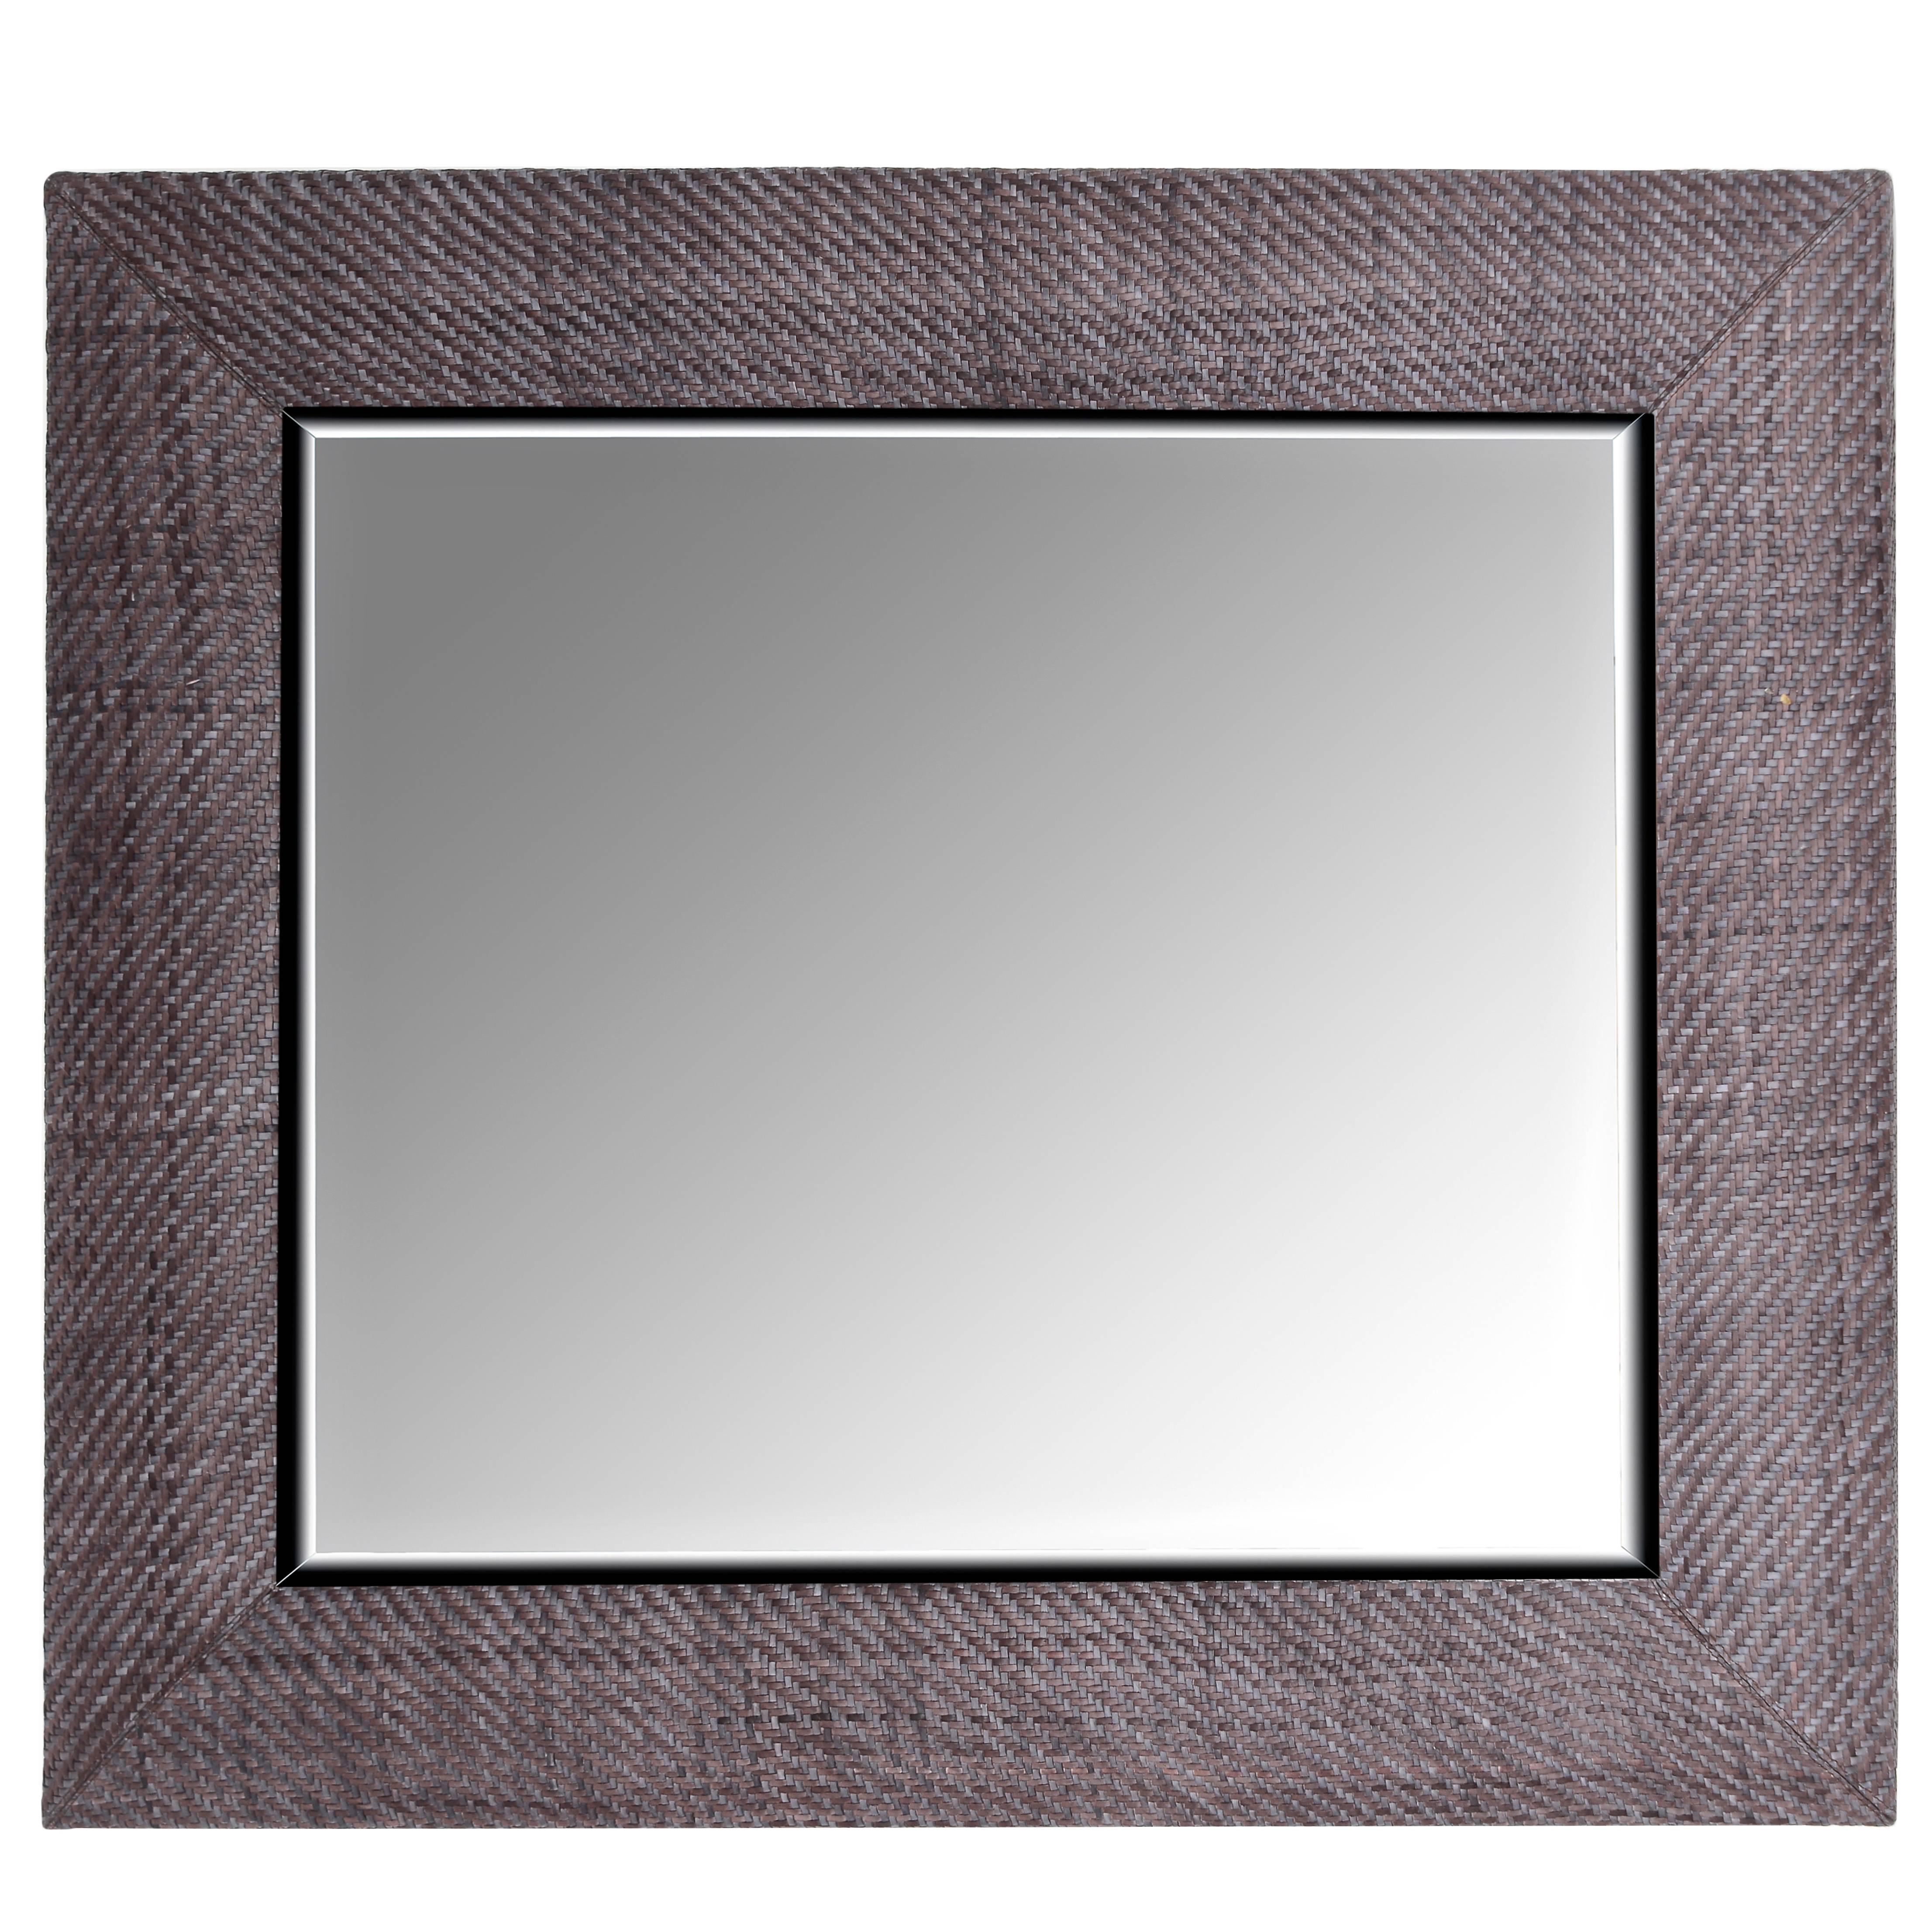 Hand-Woven London Storm Grey Leather Framed Beveled Mirror For Sale